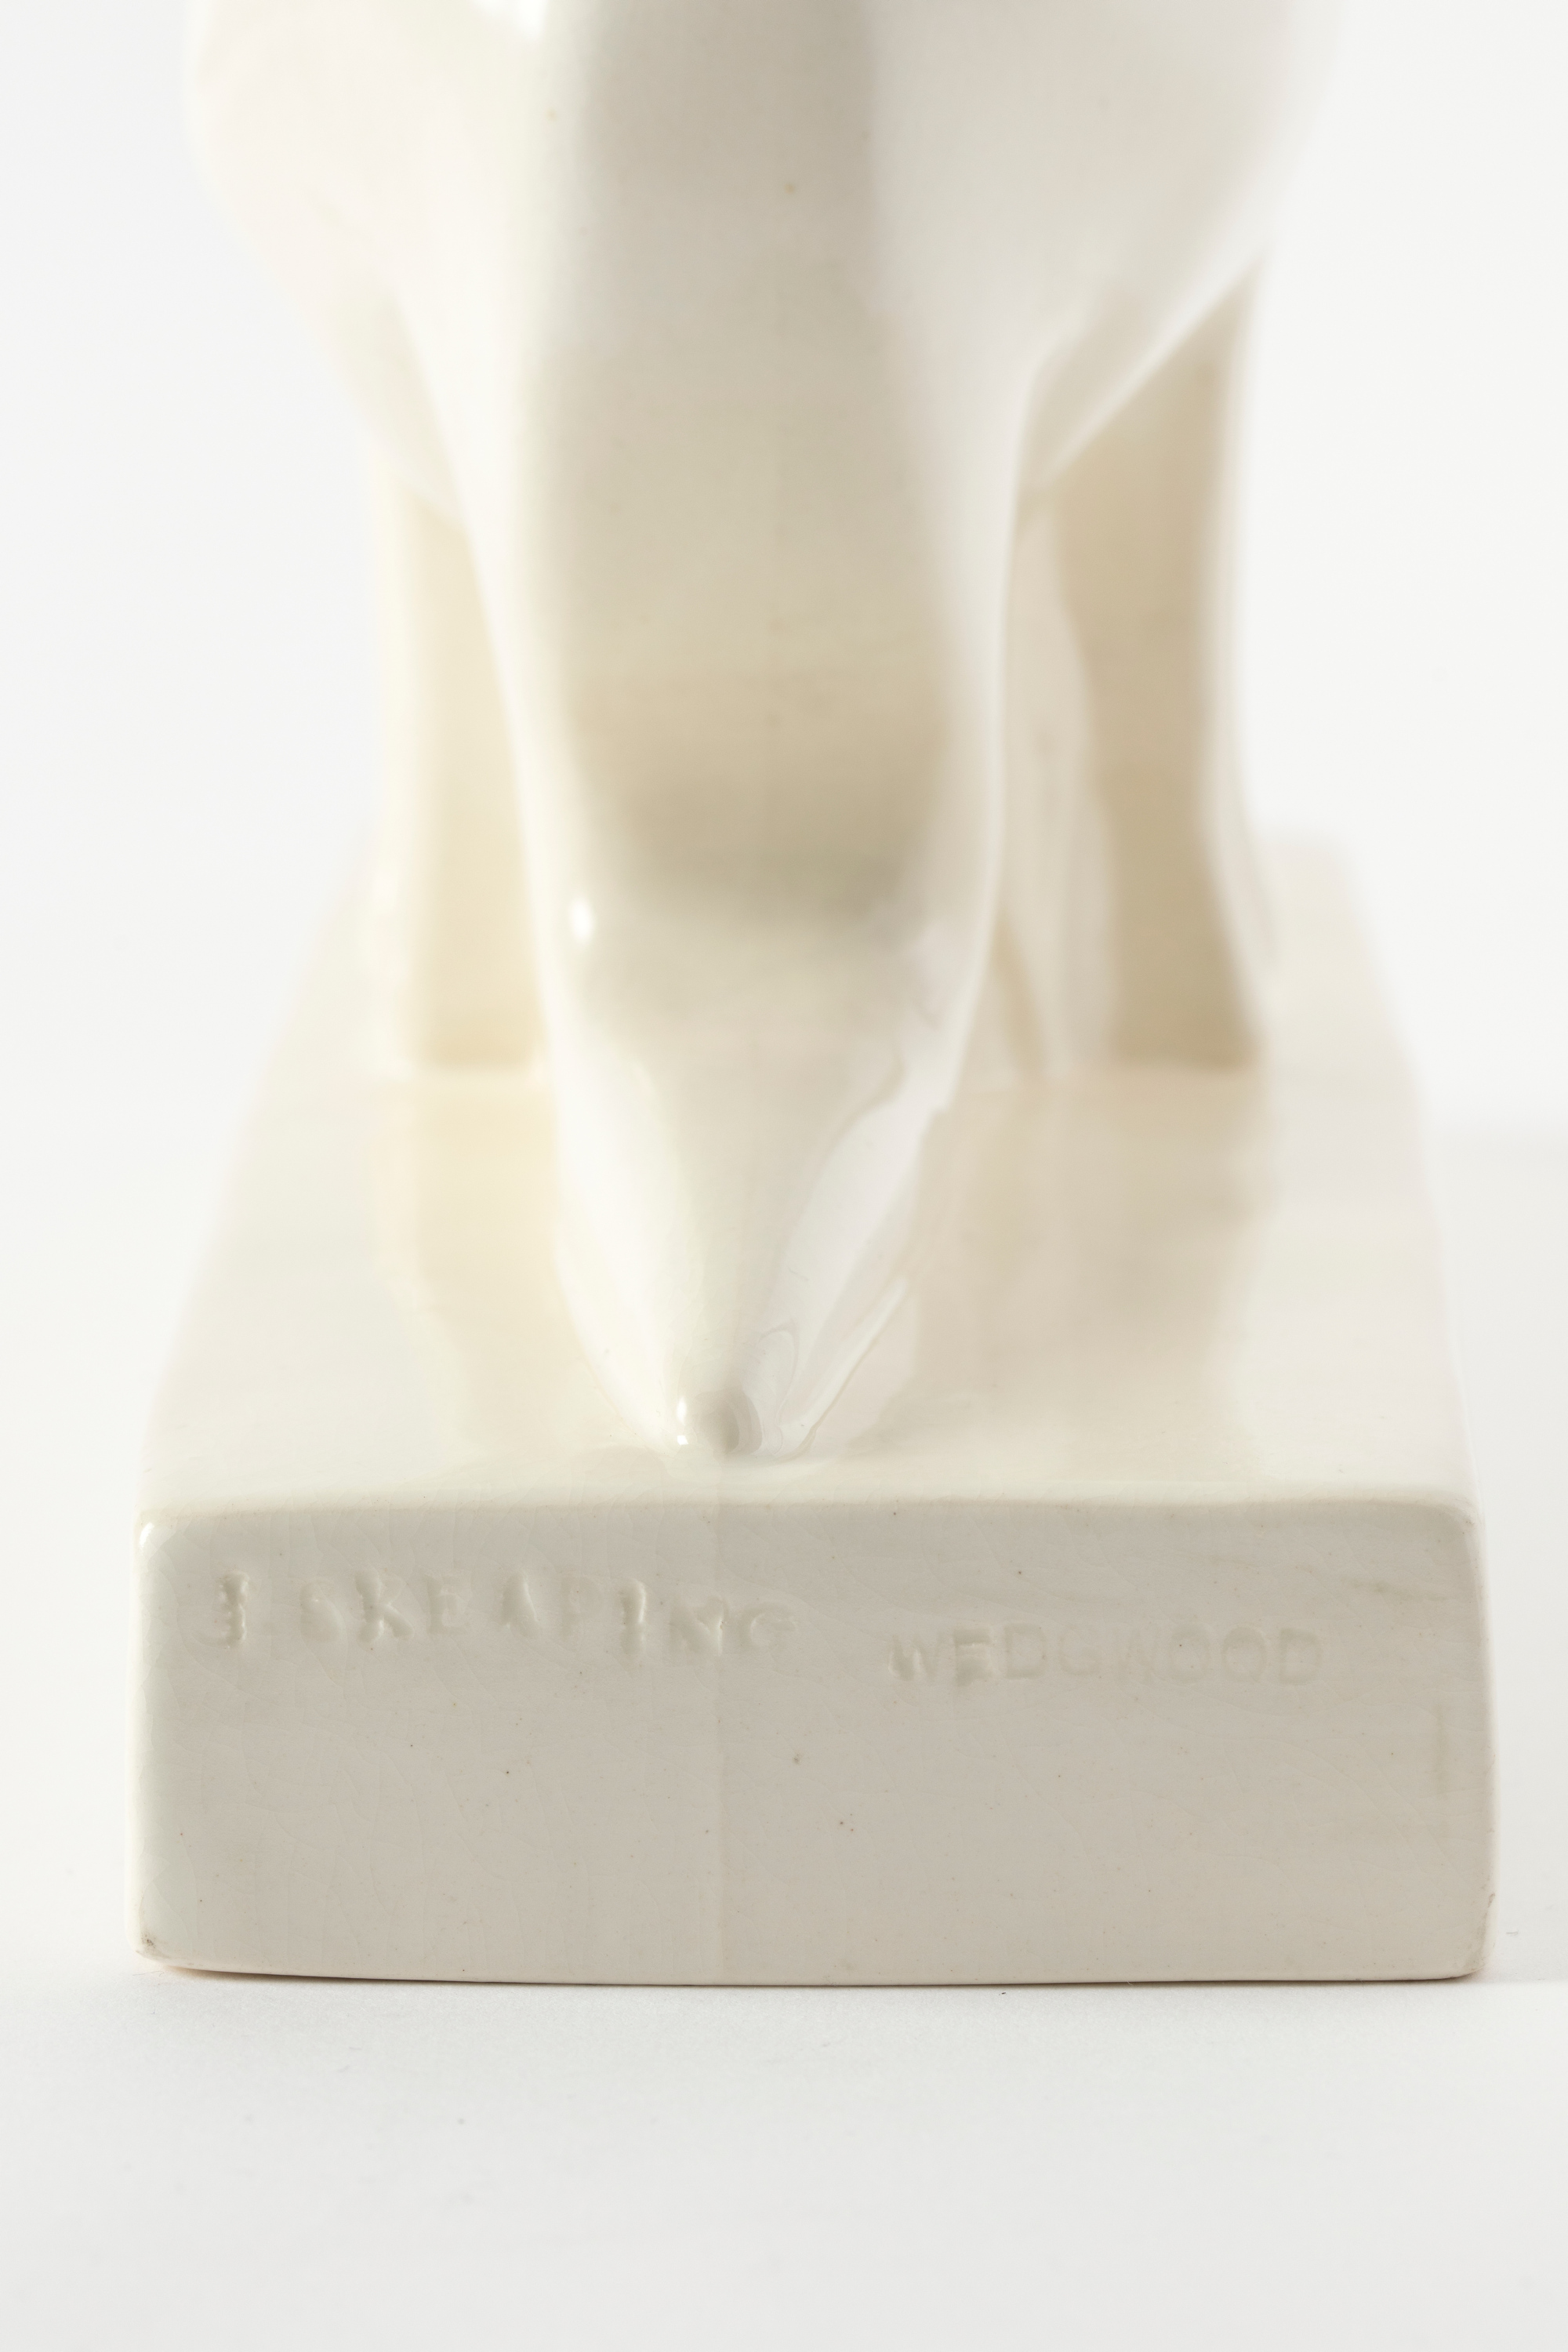 Rectangular base of a white earthenware figure showing the imprinted text ‘J SKEAPING / WEDGWOOD’.